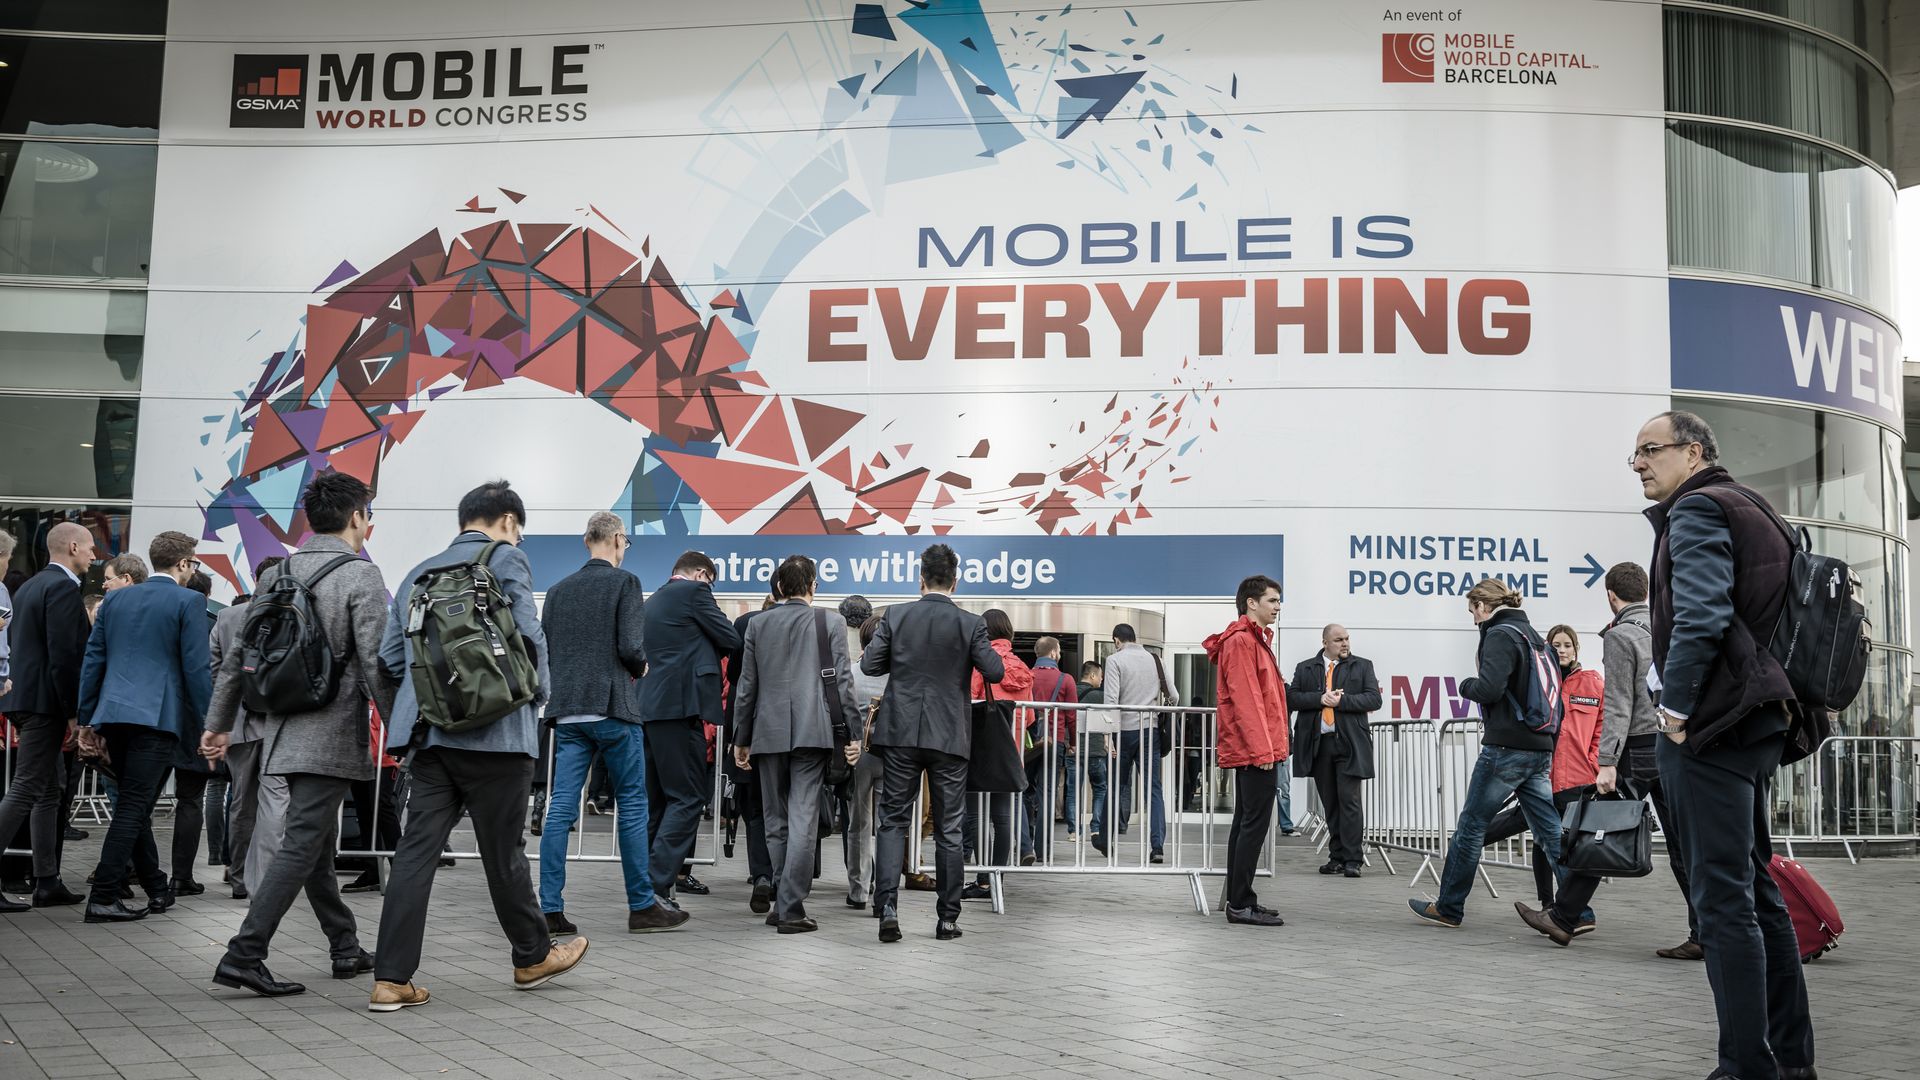 An image of people entering a past Mobile World Congress event in Barcelona